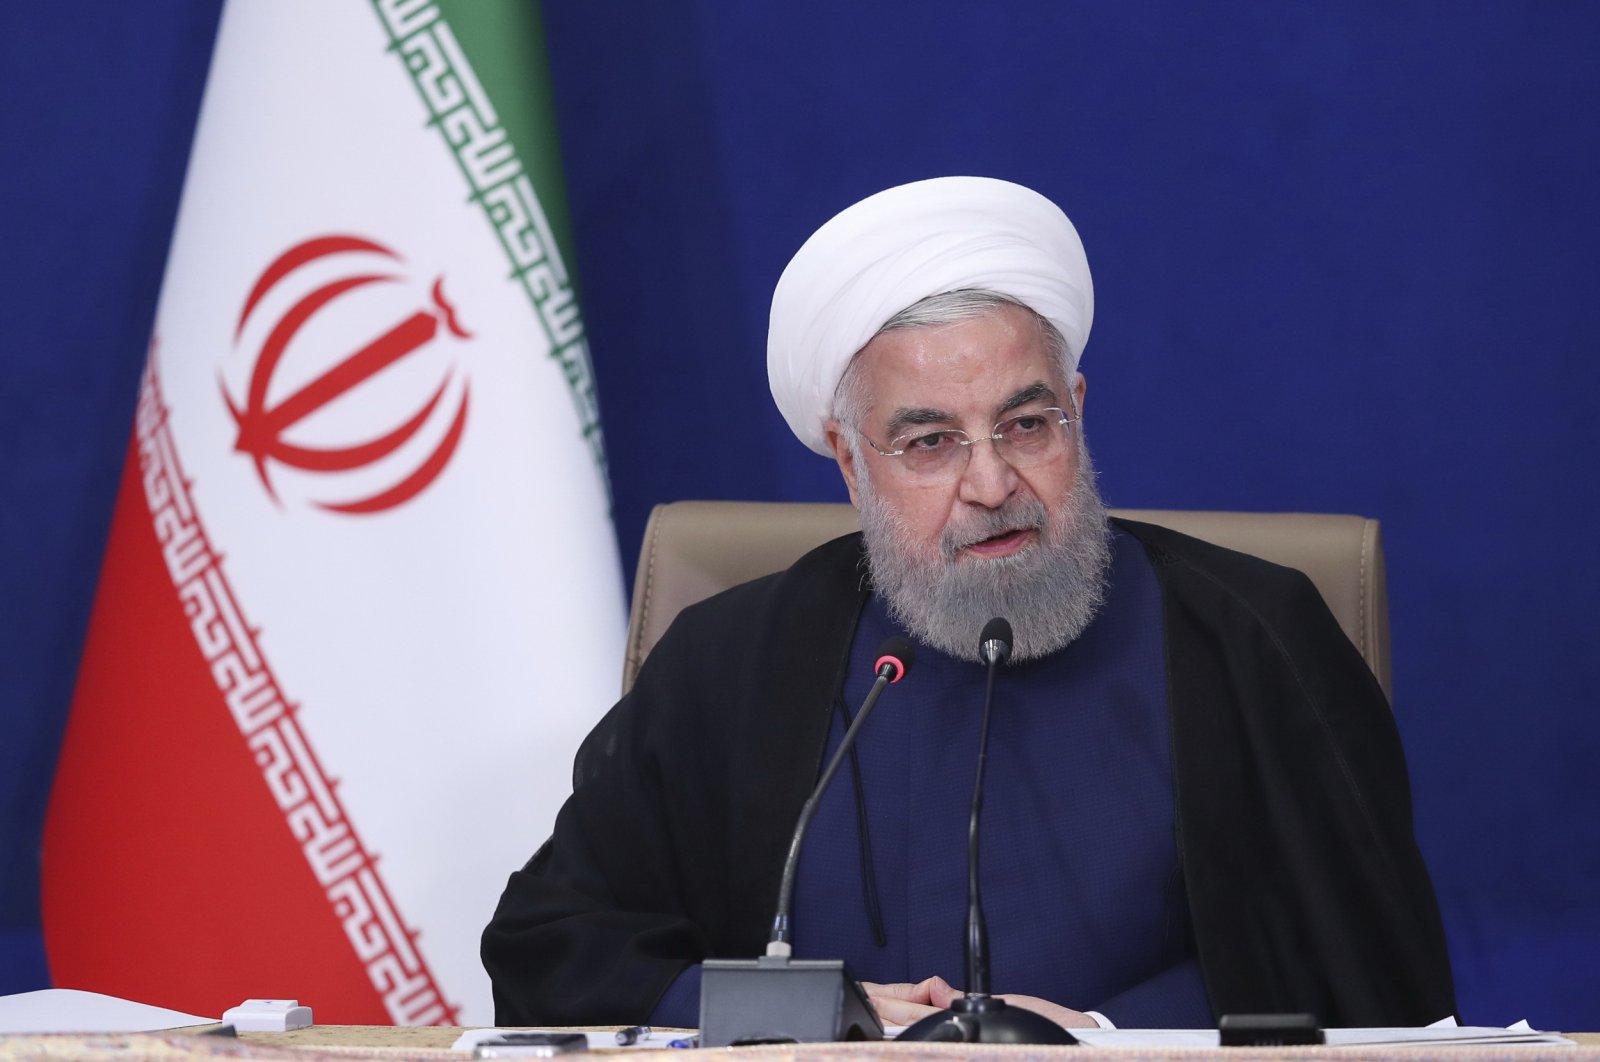 Iranian President Hassan Rouhani speaks at a meeting at the presidency compound in Tehran, Iran, July 6, 2021. (AP Photo)